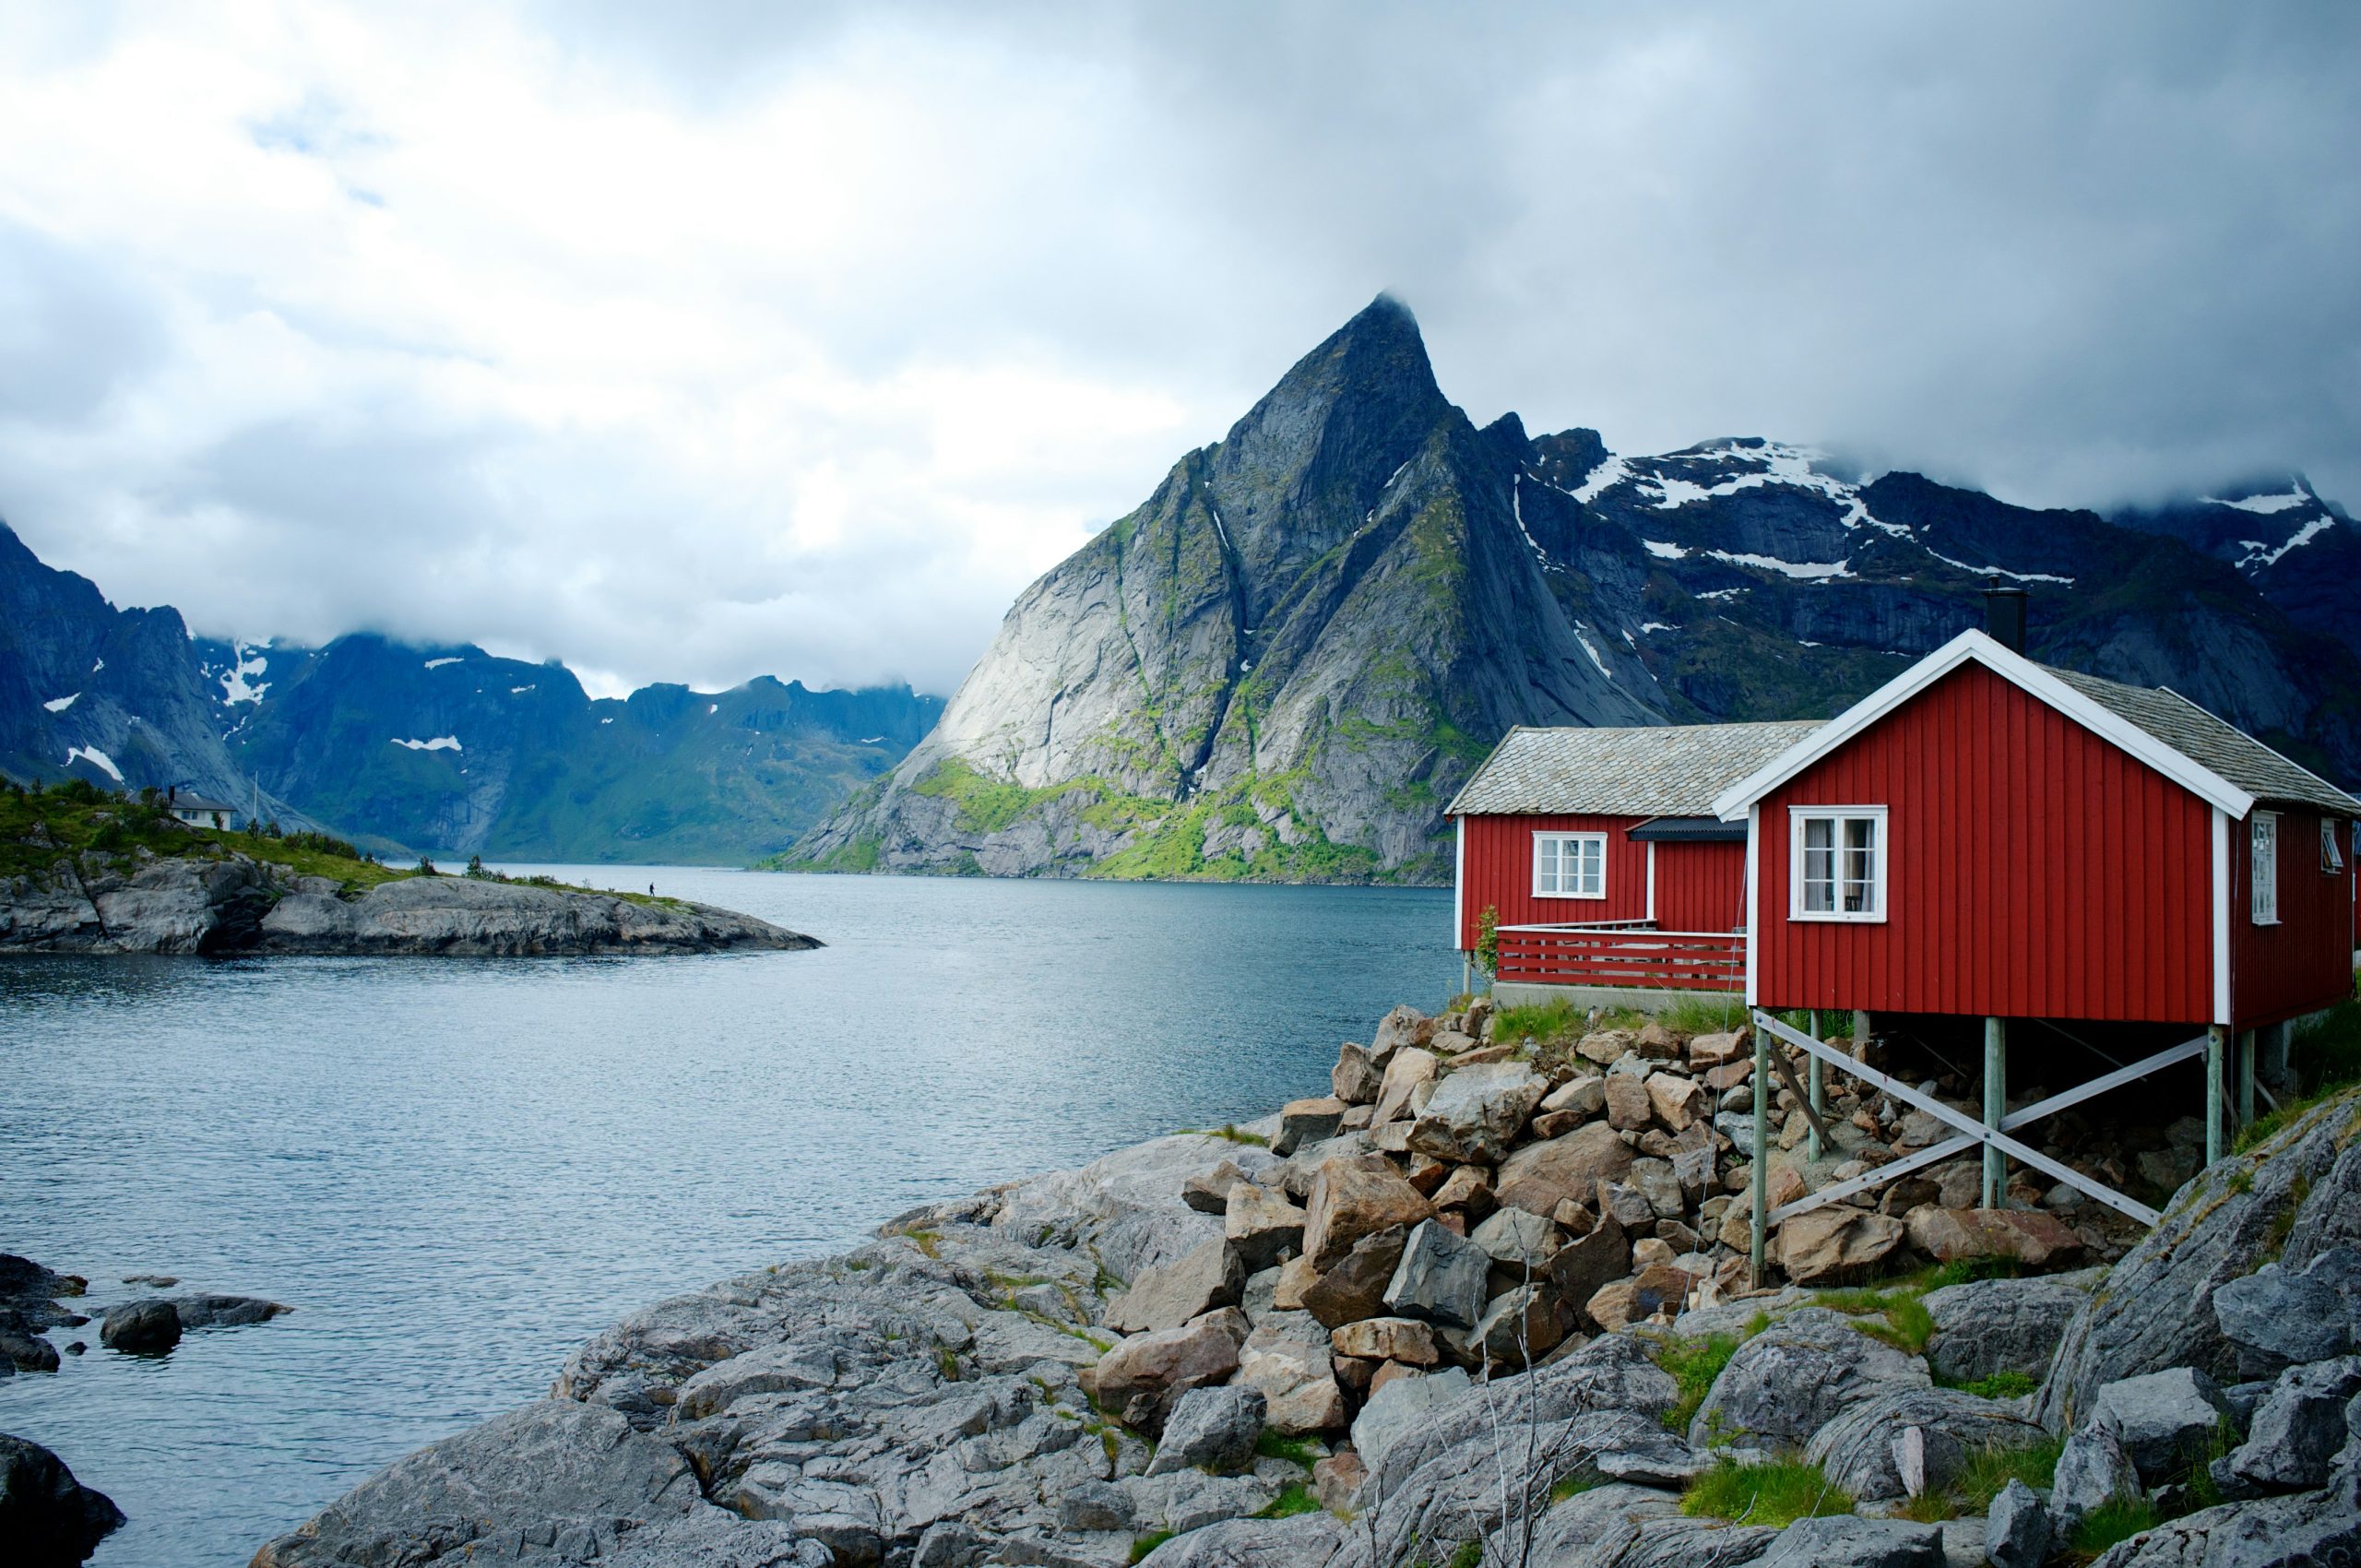 explore the breathtaking fjords and stunning landscapes of norway. plan your fjord adventure and immerse yourself in the beauty of this natural wonder.